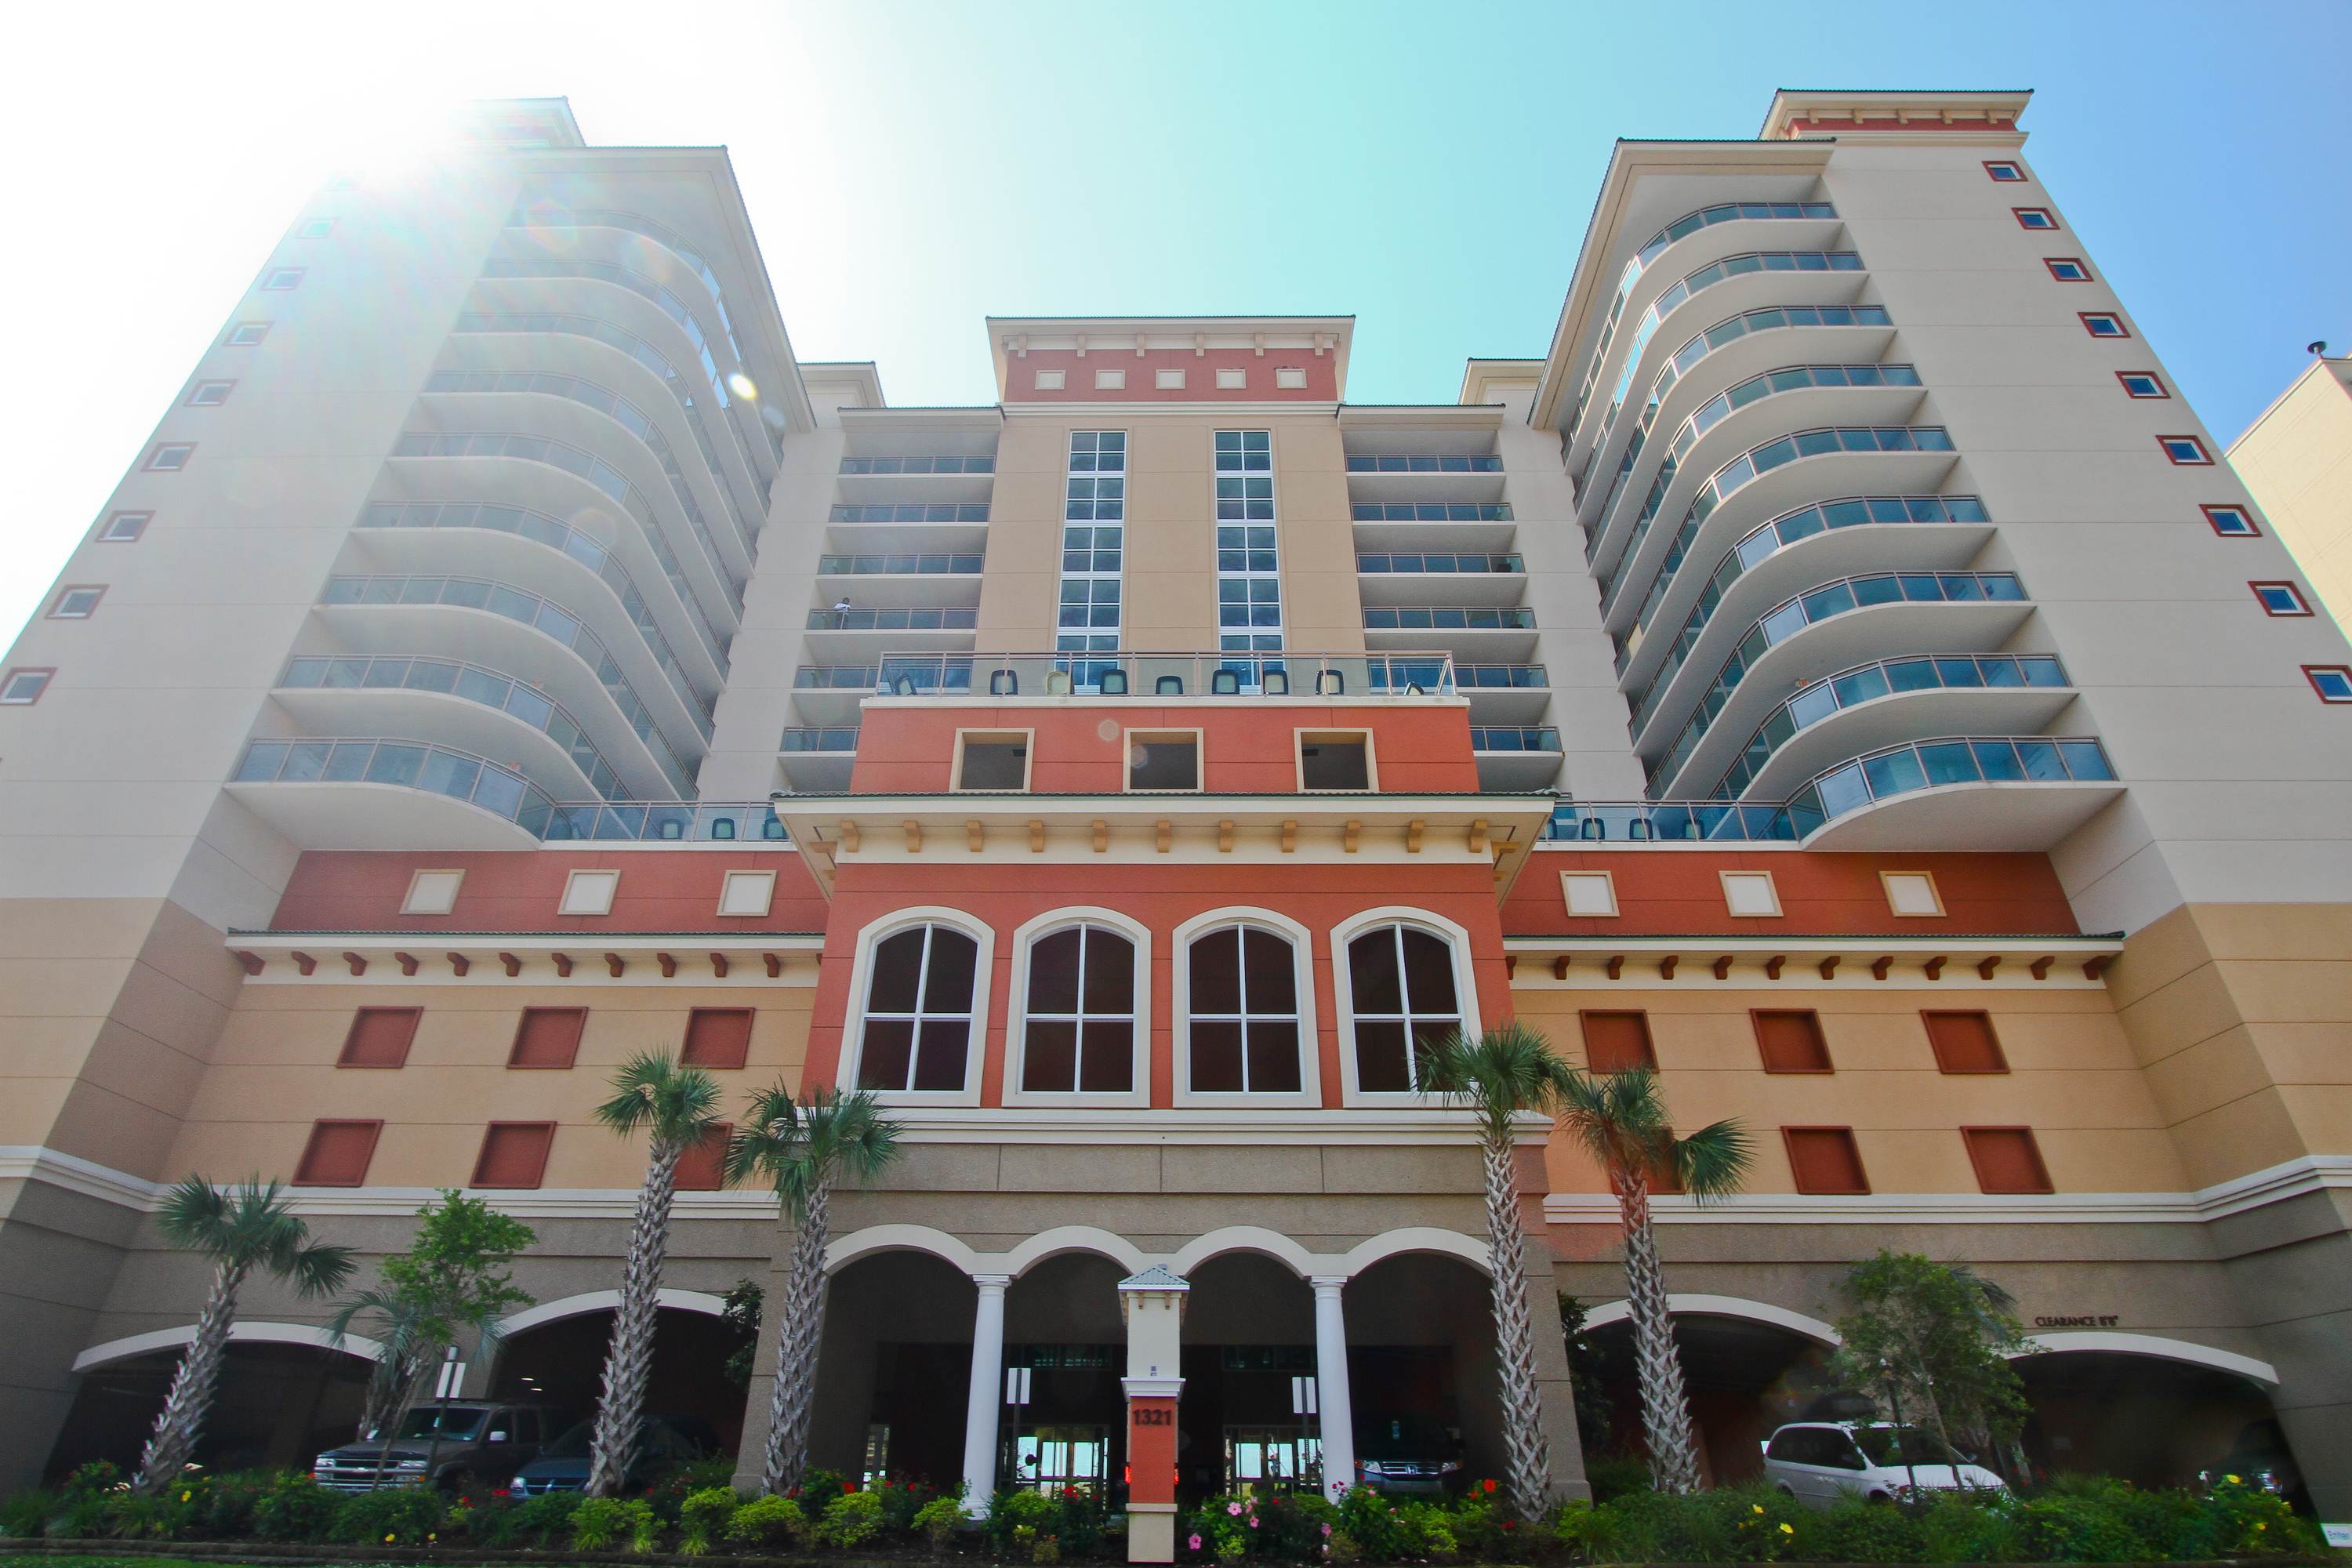 Atlantic Breeze is one of the newer upscale oceanfront condos in North Myrtle Beach.